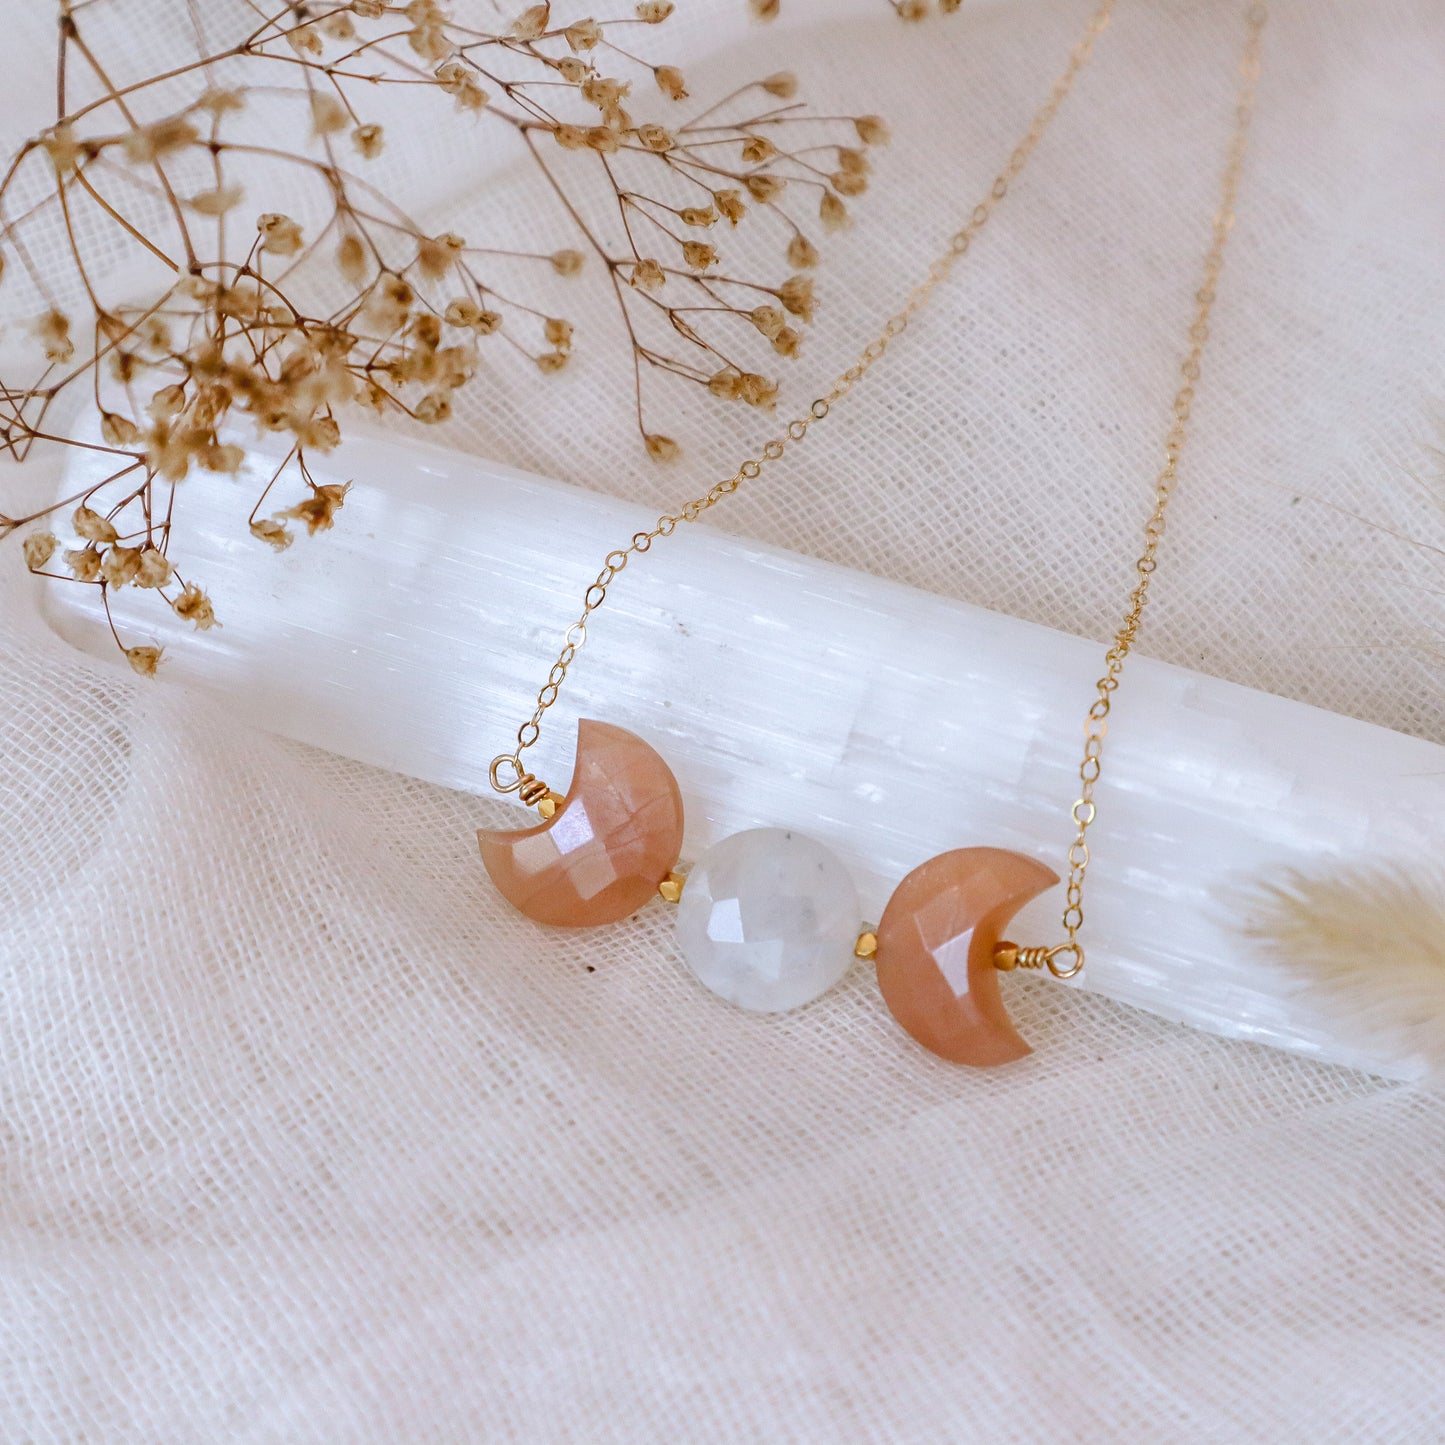 Triple Moon Goddess Necklace | Peach Moonstone | Choose your length and metal